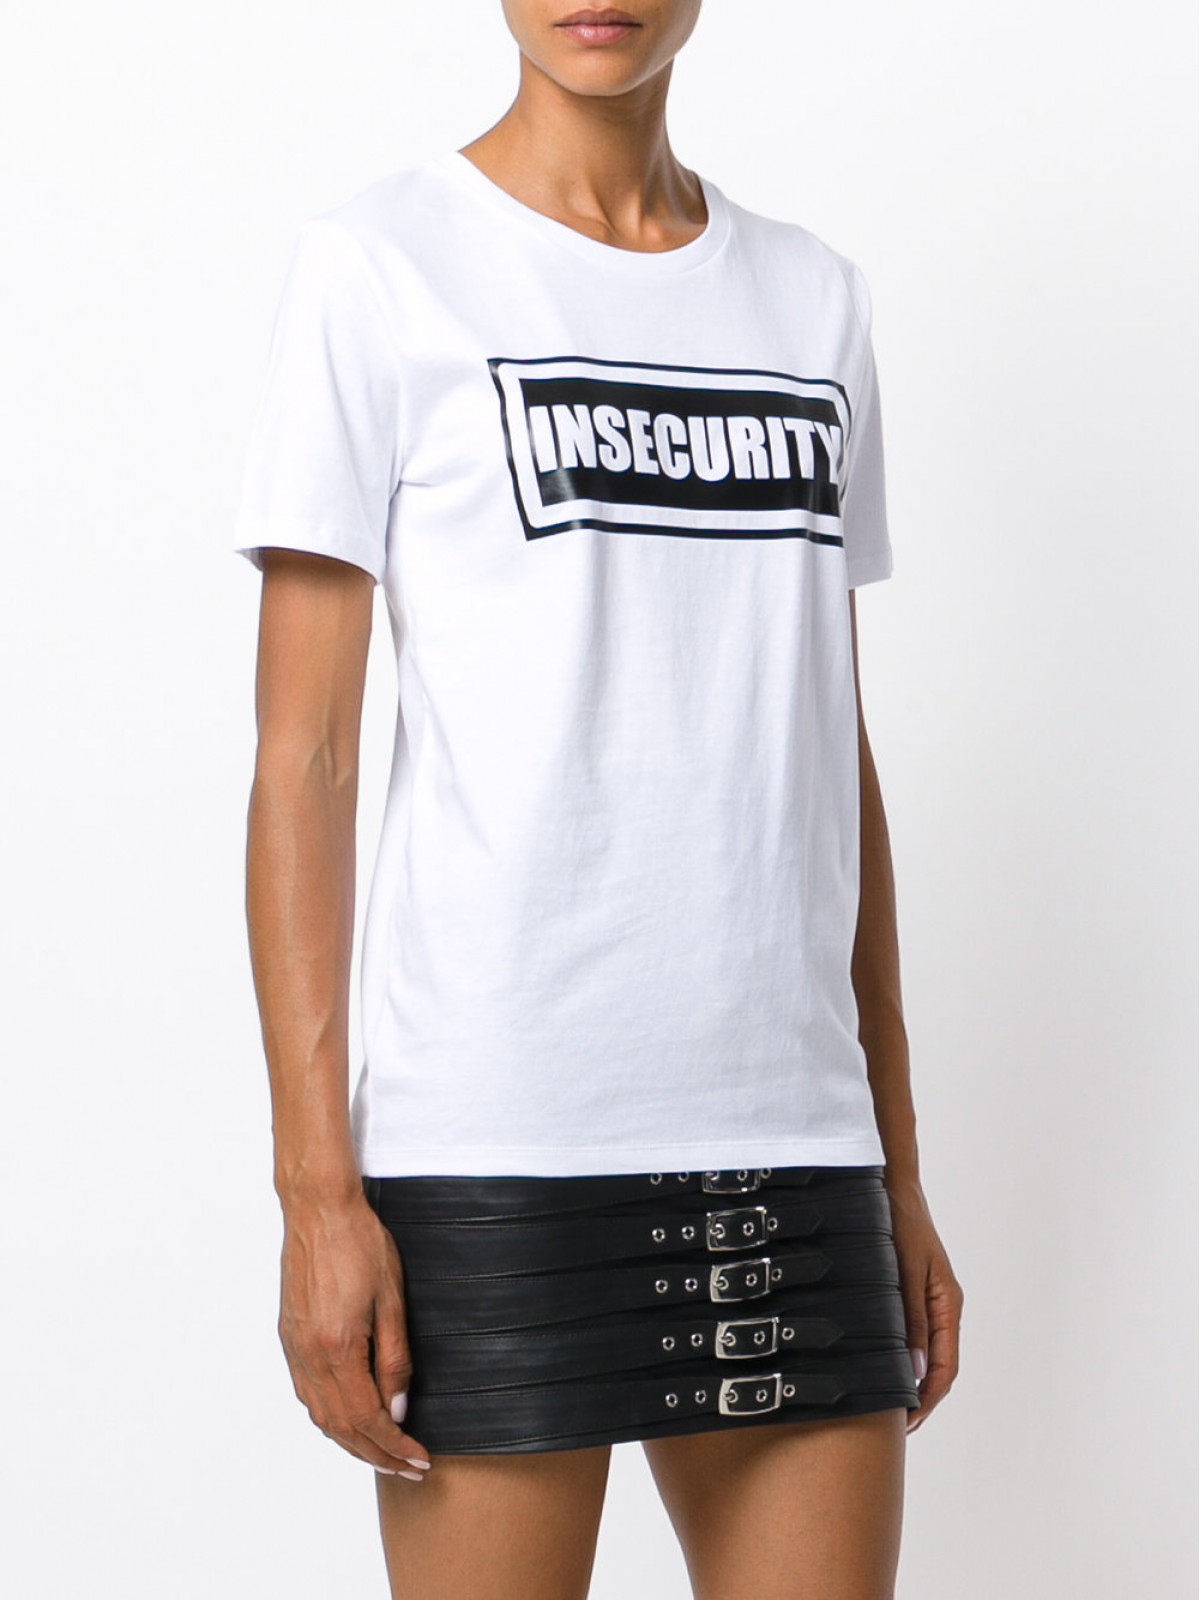 INSECURITY T-SHIRT